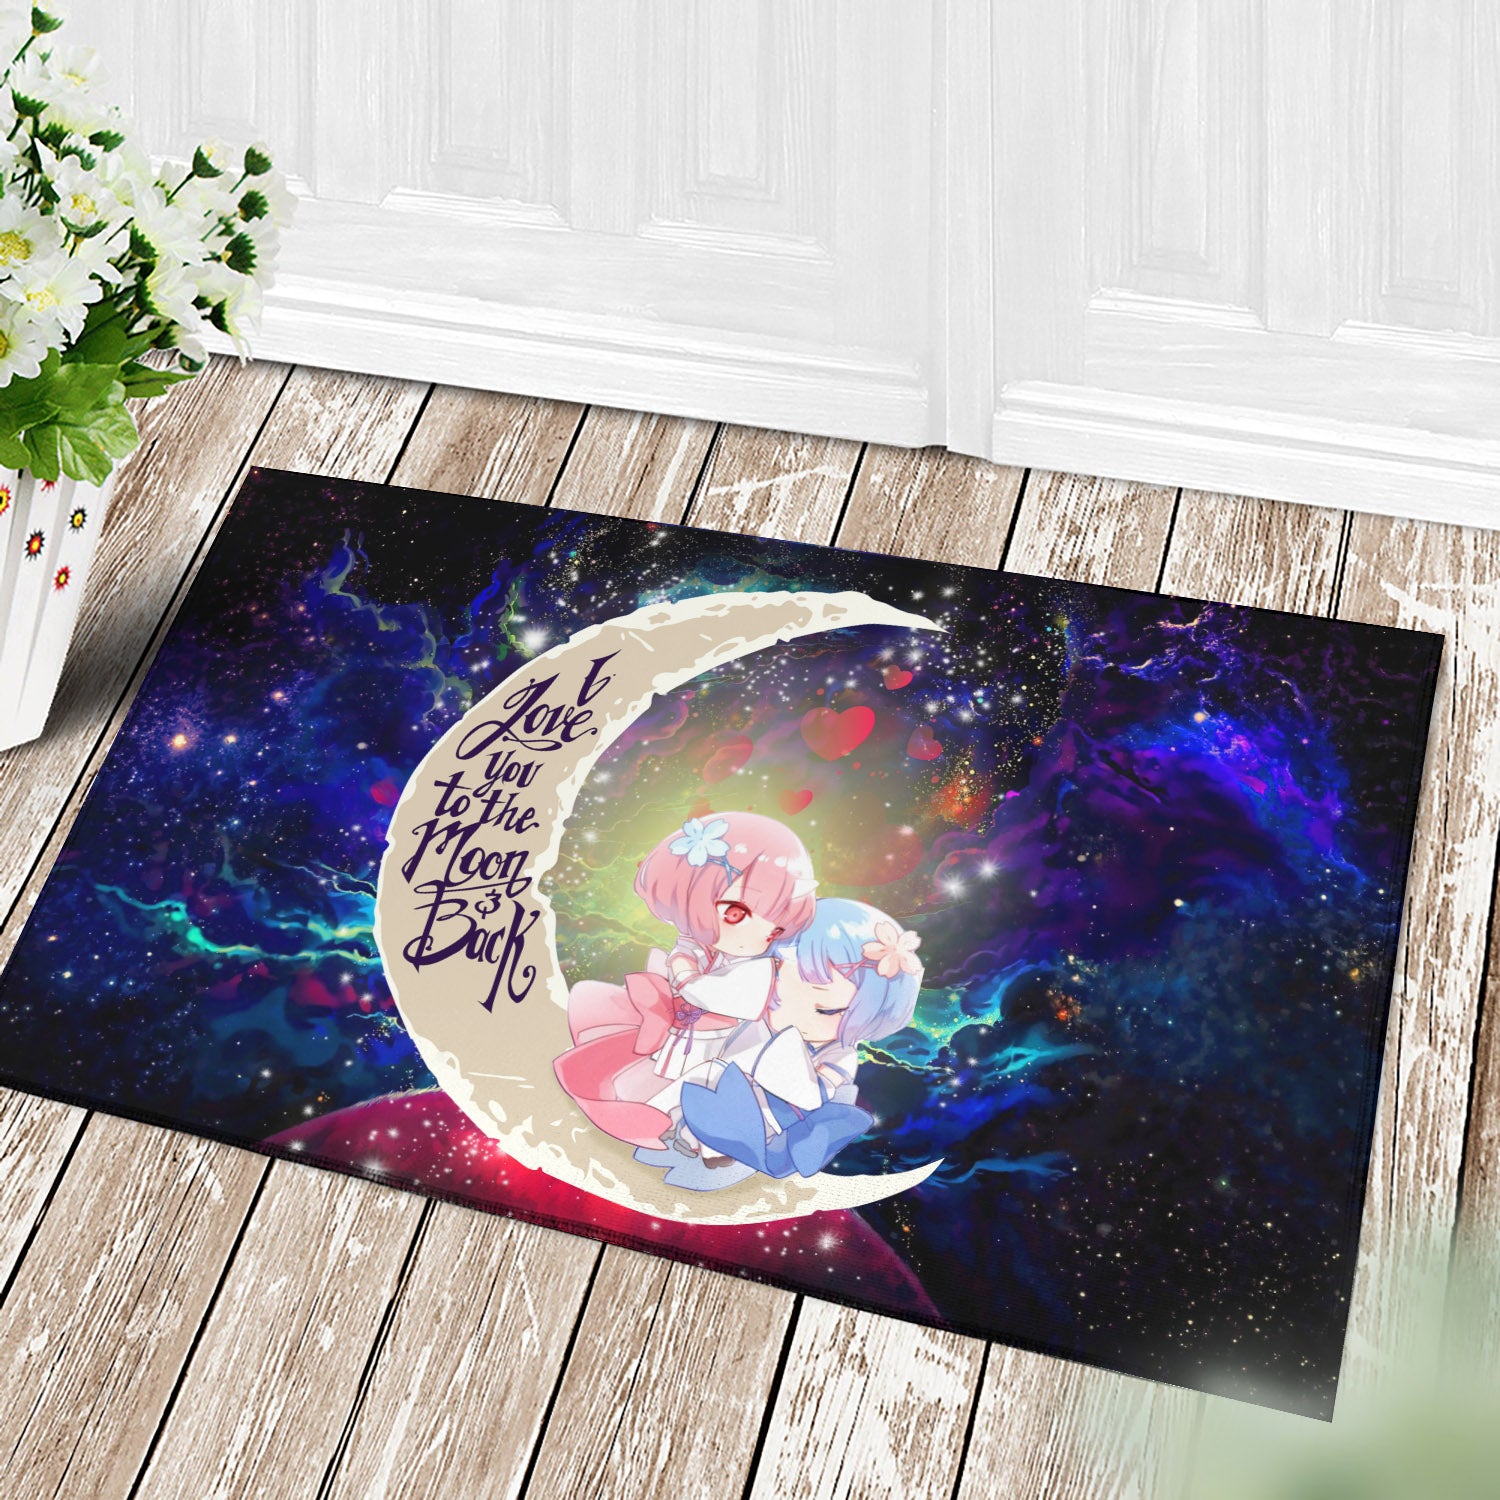 Ram And Rem Re Zero Love You To The Moon Galaxy Back Door Mats Home Decor